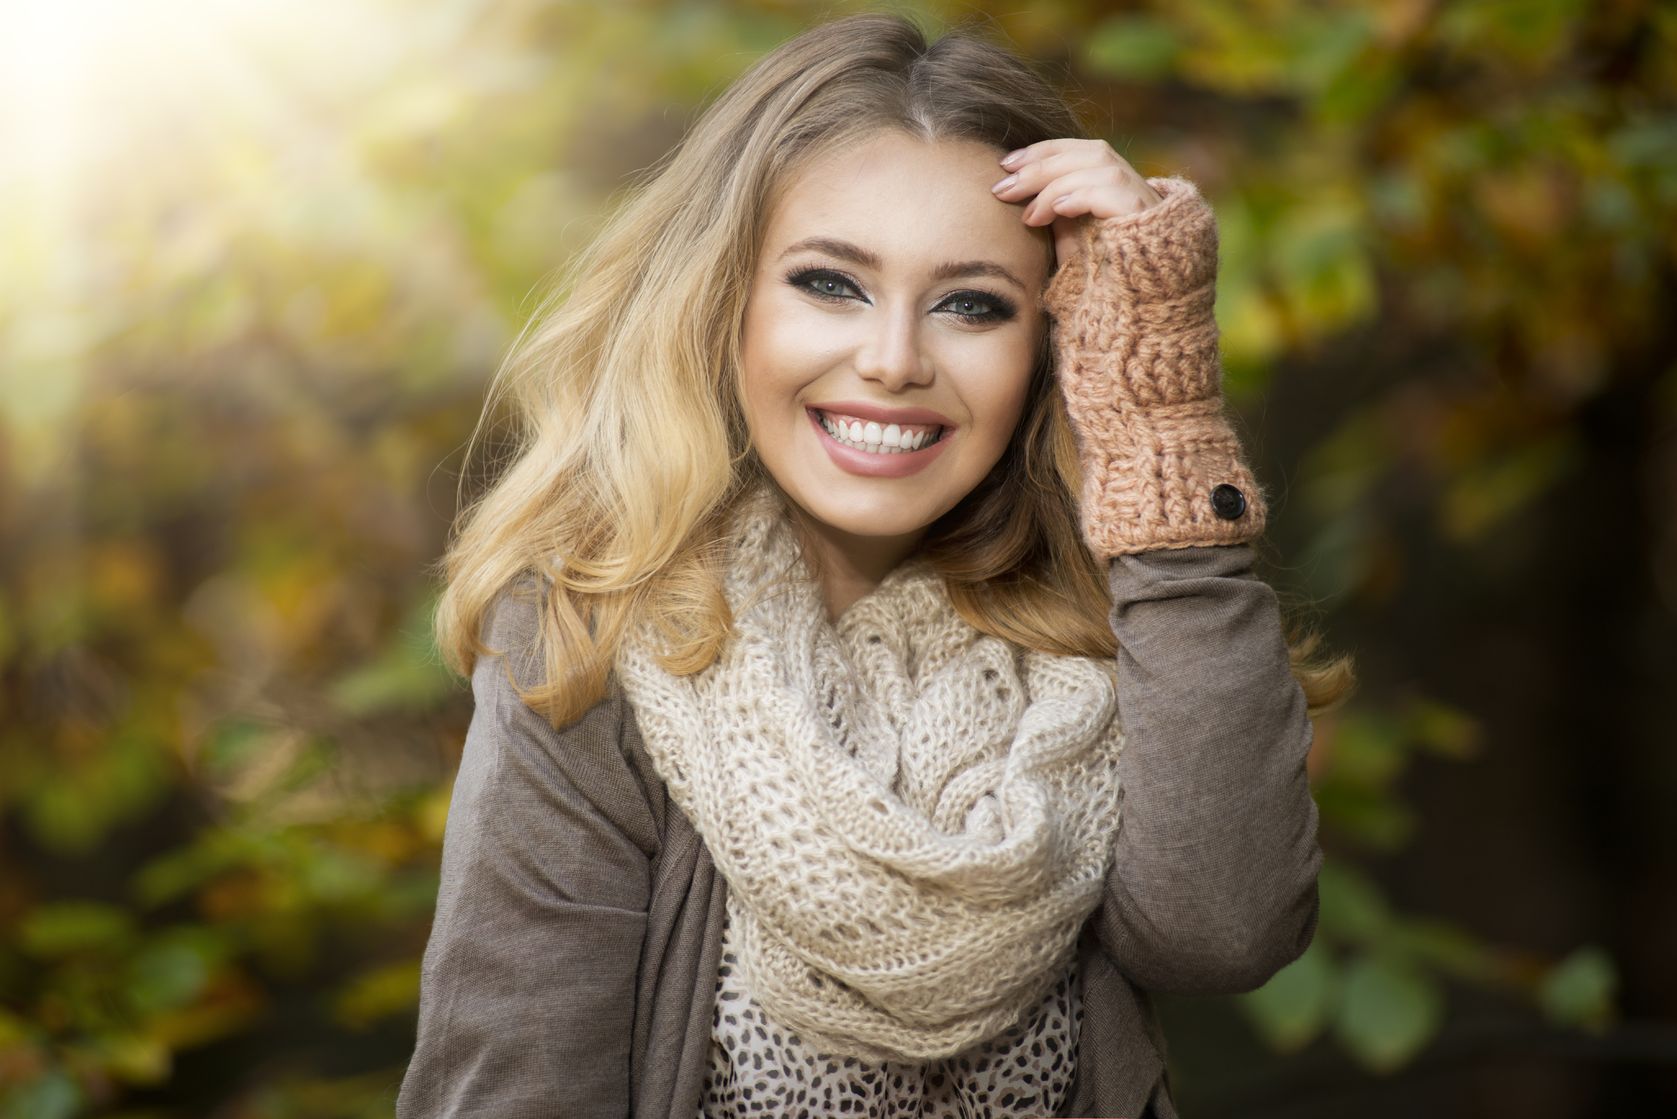 Secondary Rhinoplasty in NJ: Prices and Common Questions